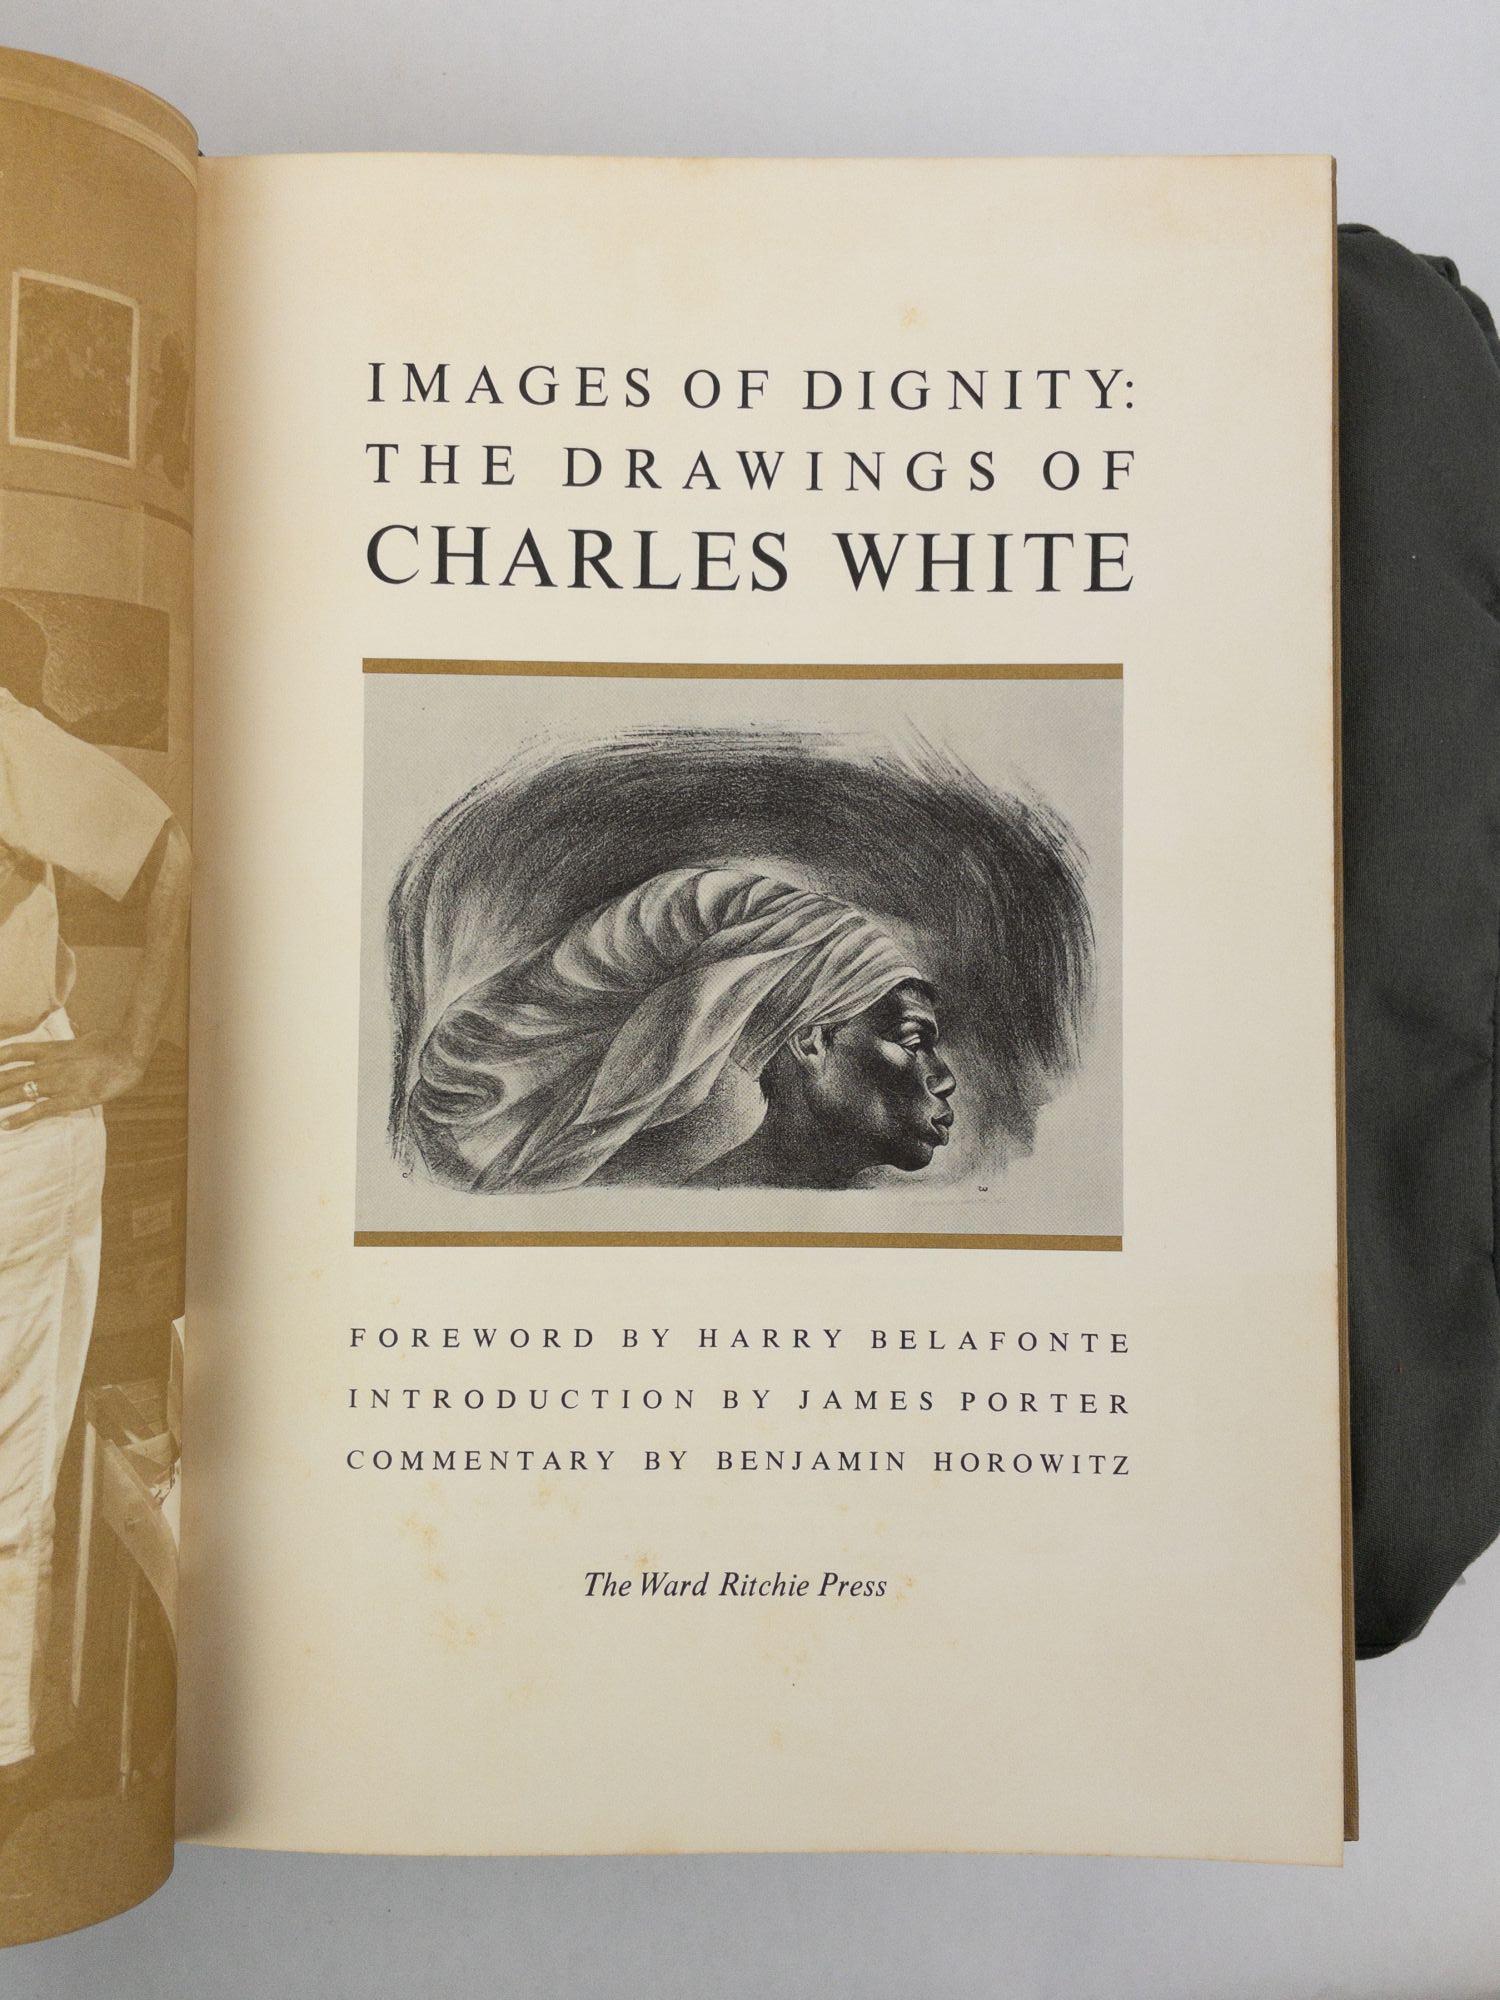 Product Image for IMAGES OF DIGNITY: THE DRAWINGS OF CHARLES WHITE [Signed]